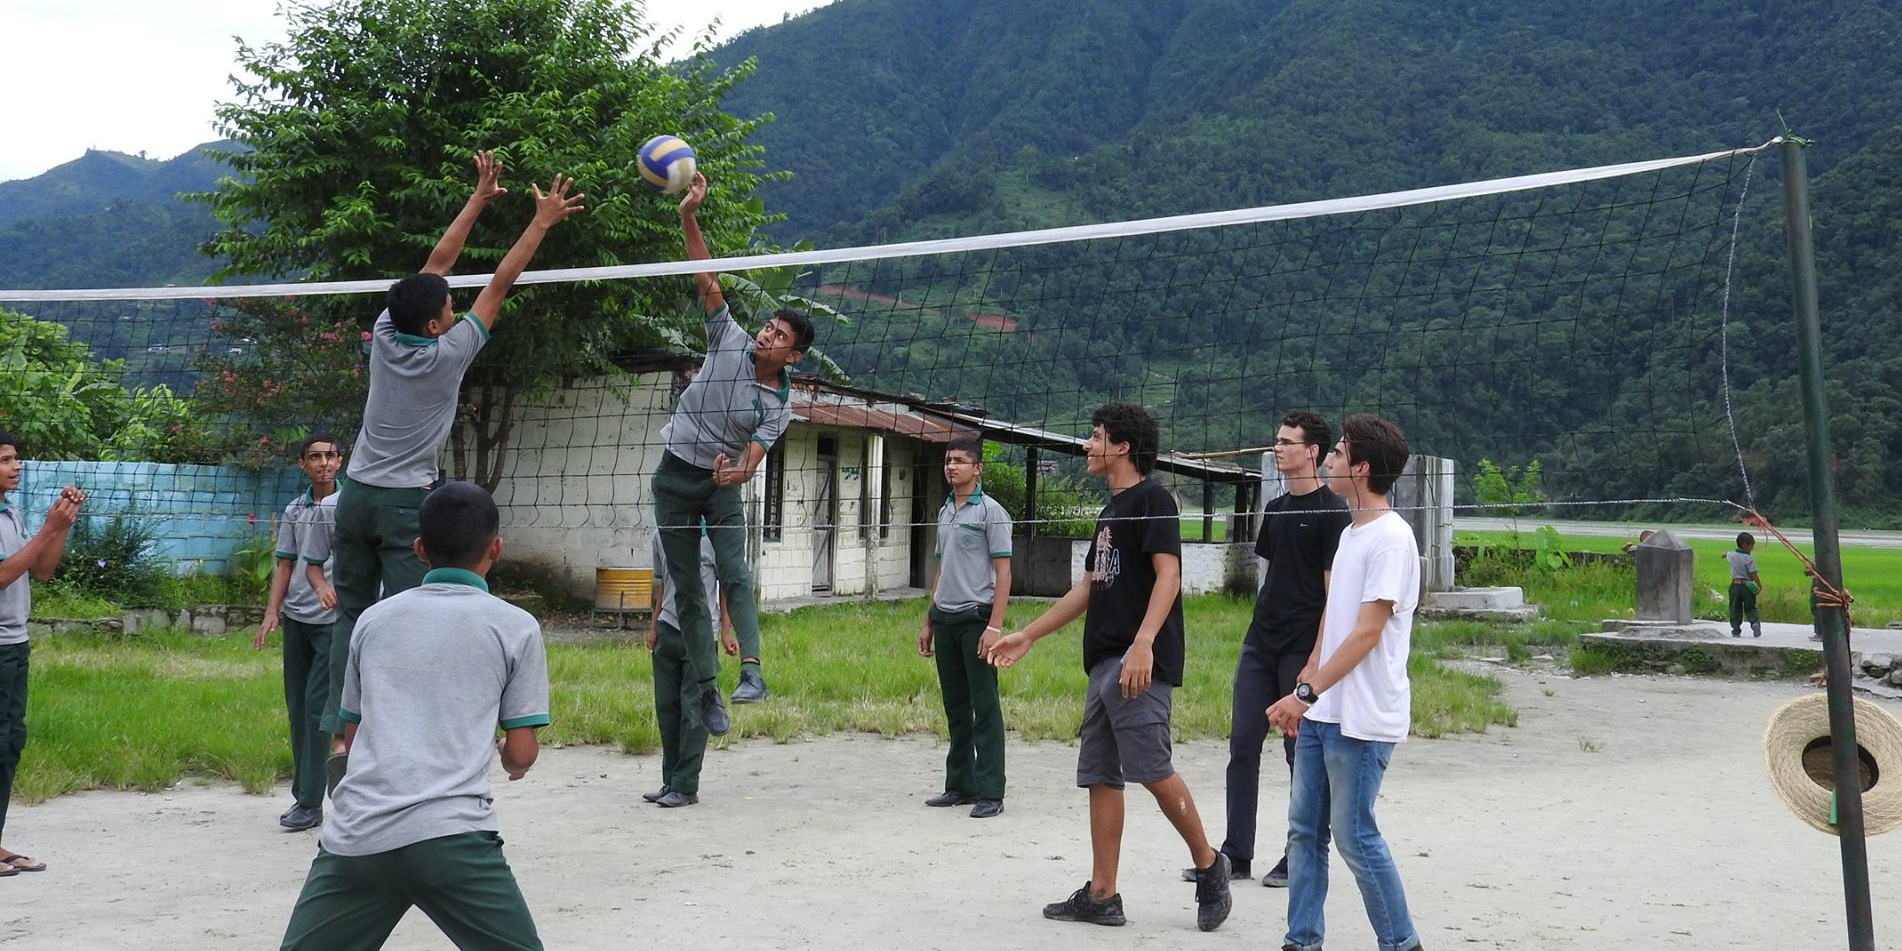 Health volunteers identified issues around upper body strength in Pokhara, Nepal. Volleyball, and other sports were introduced as part of efforts to reach UN SDG 3: Good Health and Wellbeing.